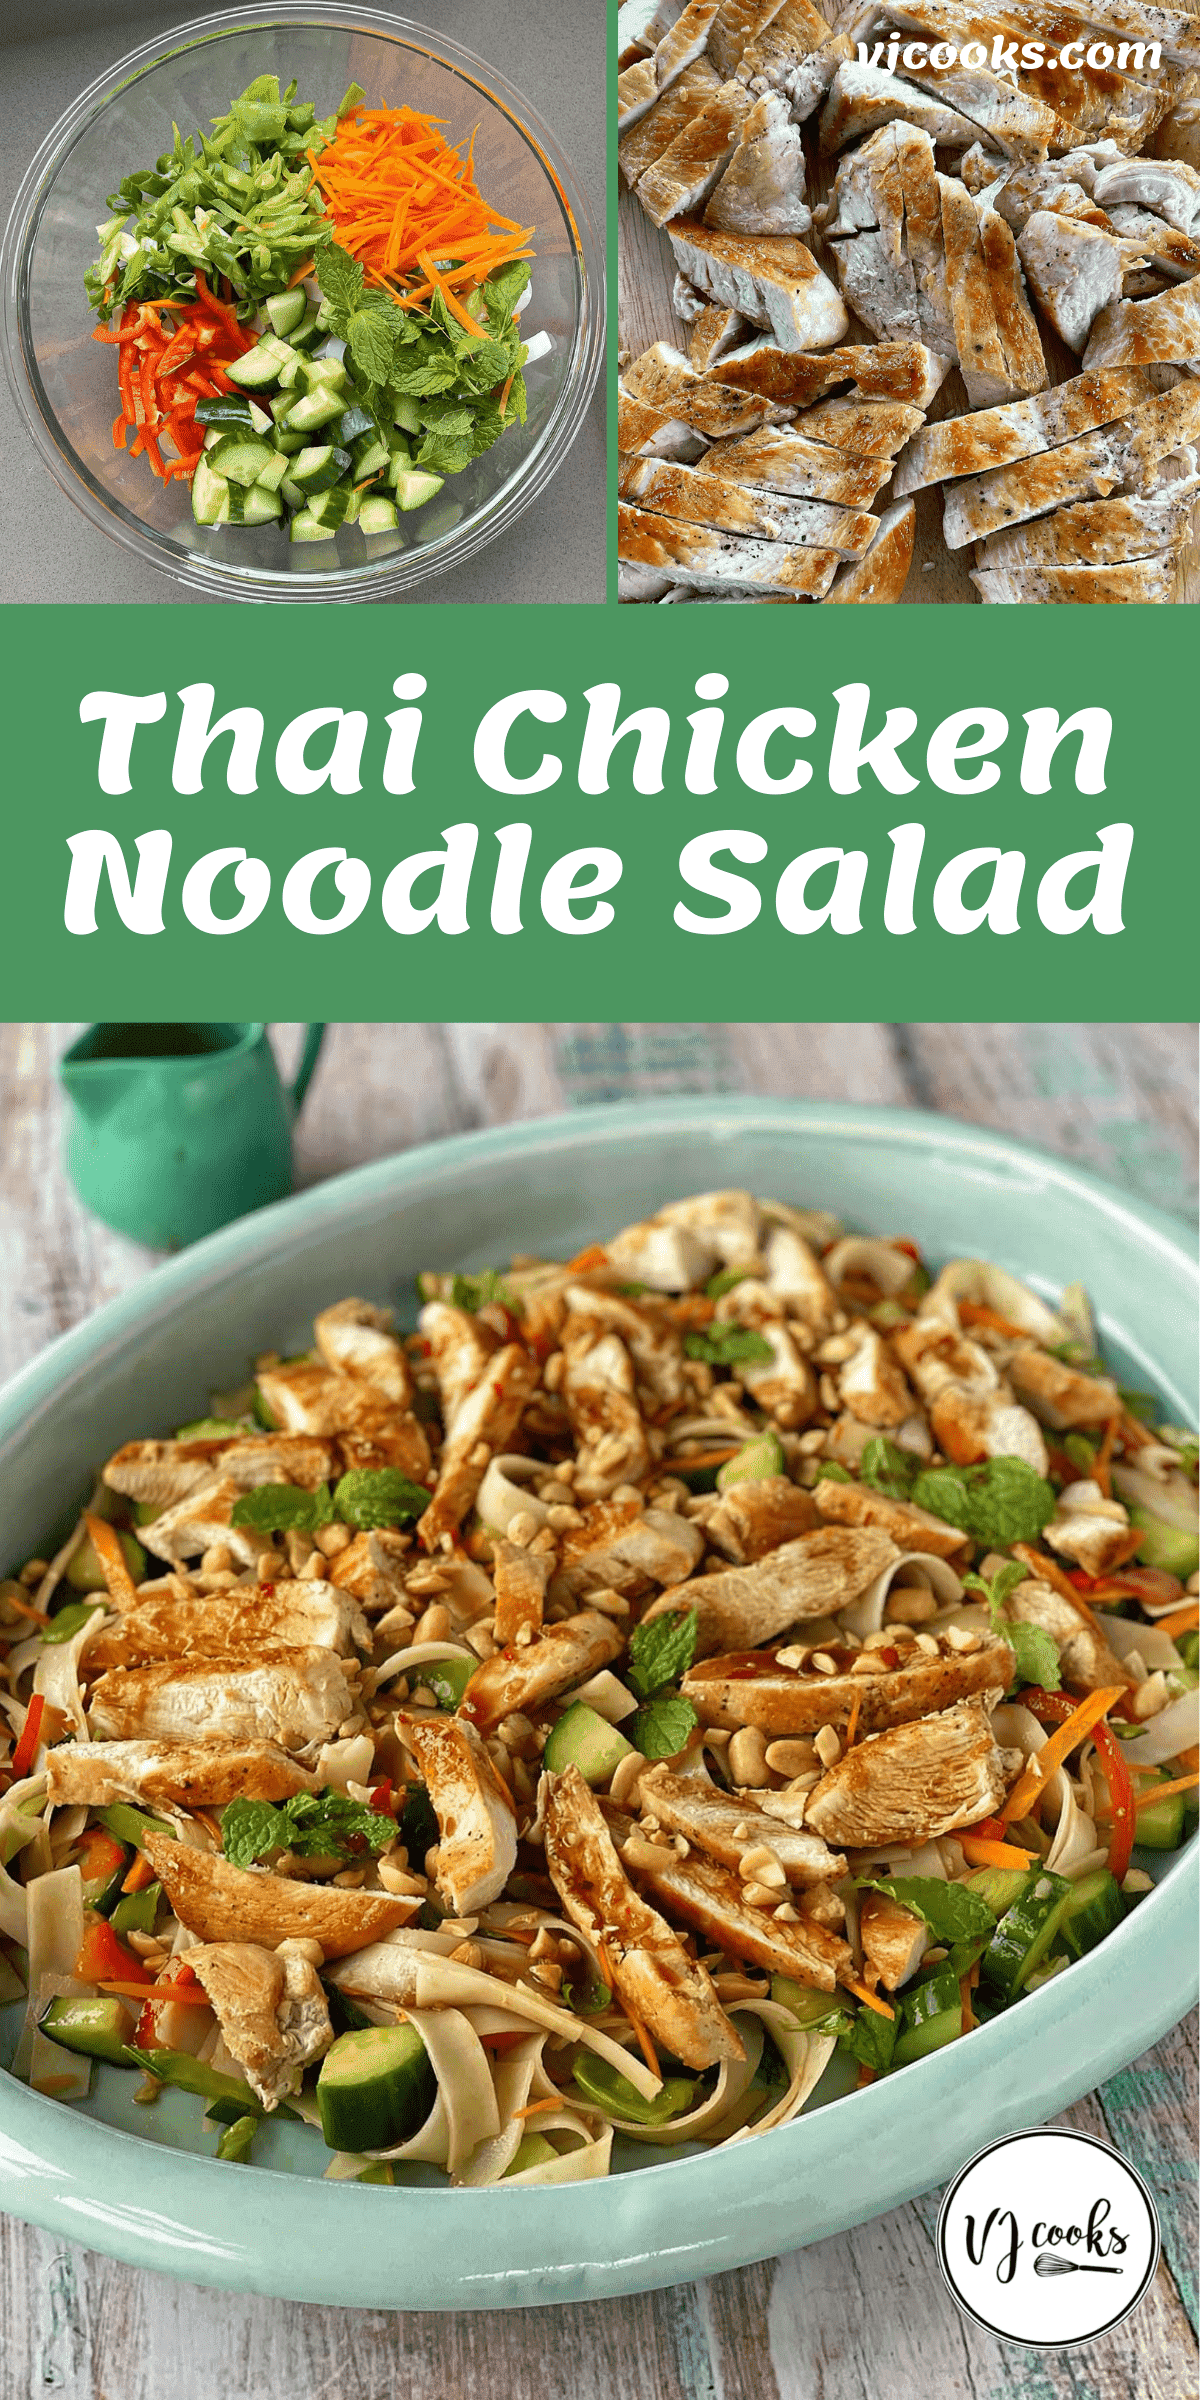 The process of making Thai Chicken Noodle Salad